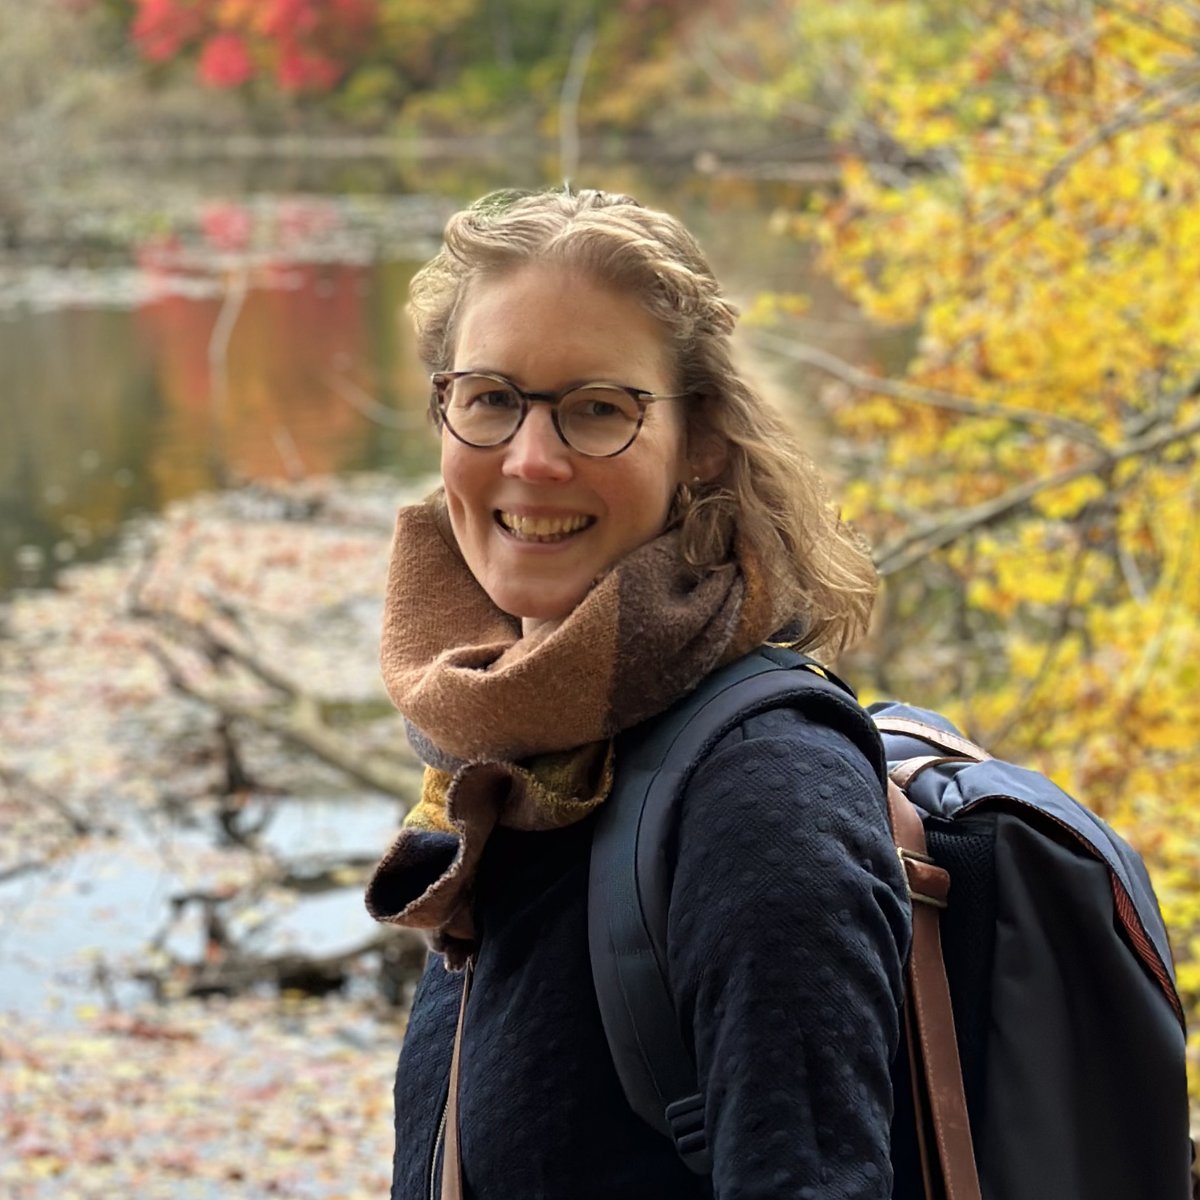 We are very happy that our newest postdoc colleague, Els, has recently started in the lab! She will be joining our team investigating degradation of nuclear pore complexes by autophagy, using expertise gained during her postdoc time with @Schliekerlab. Welcome Els 🎉🎉🎉